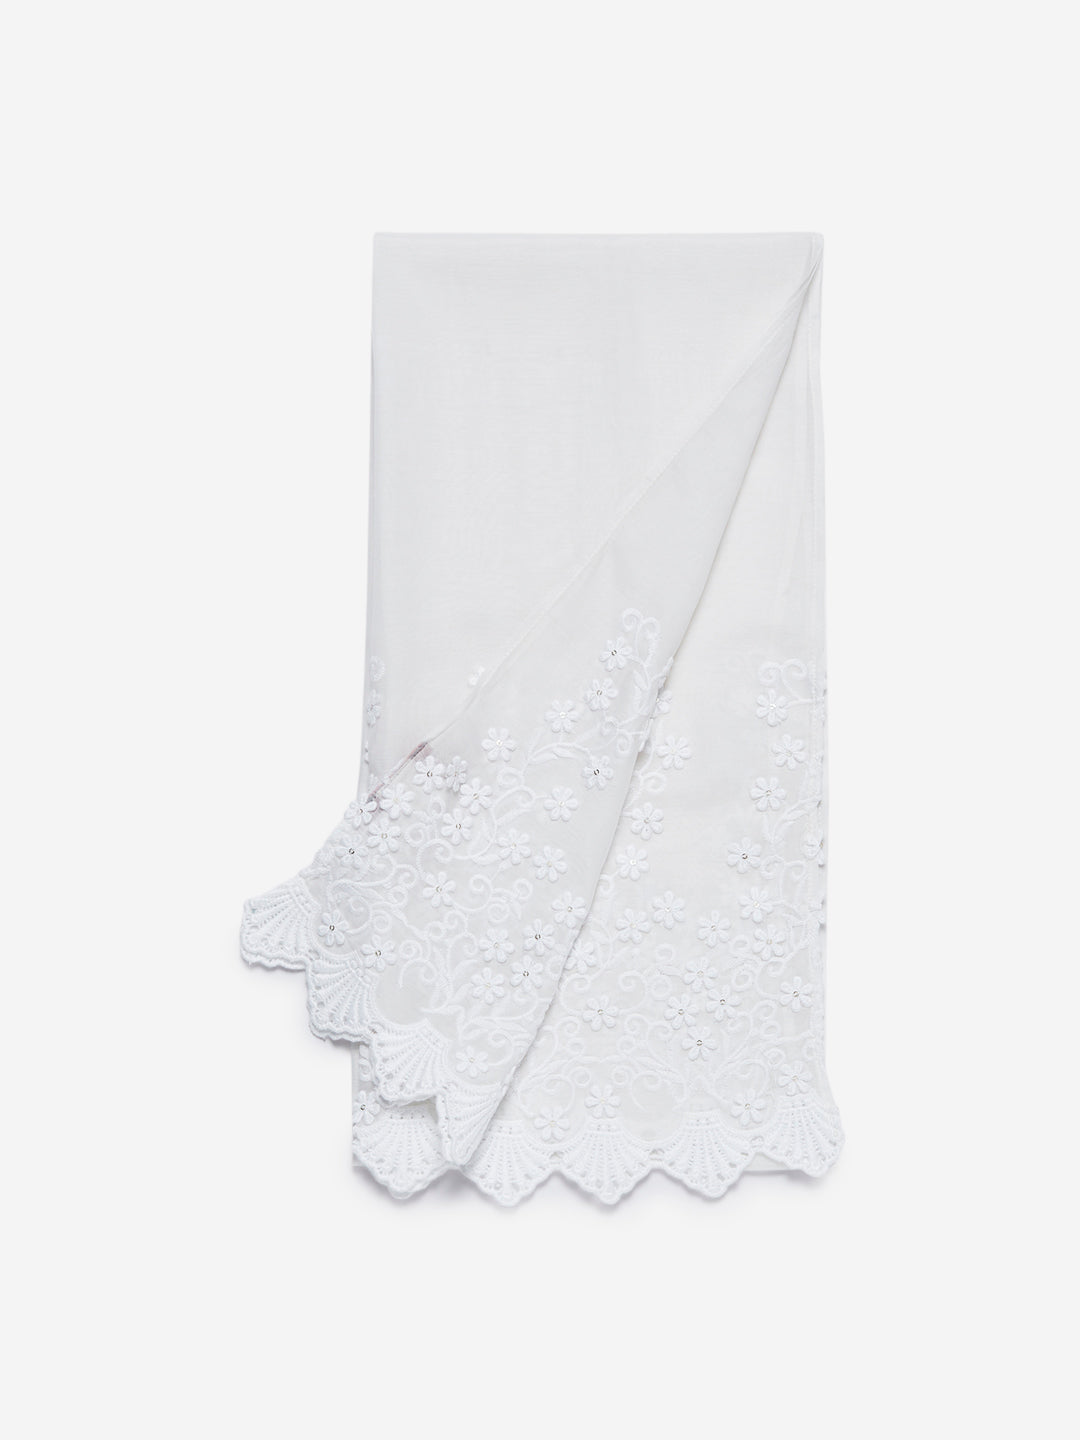 Zuba White Embroidered Cotton-Silk Stole for women full view - Westside